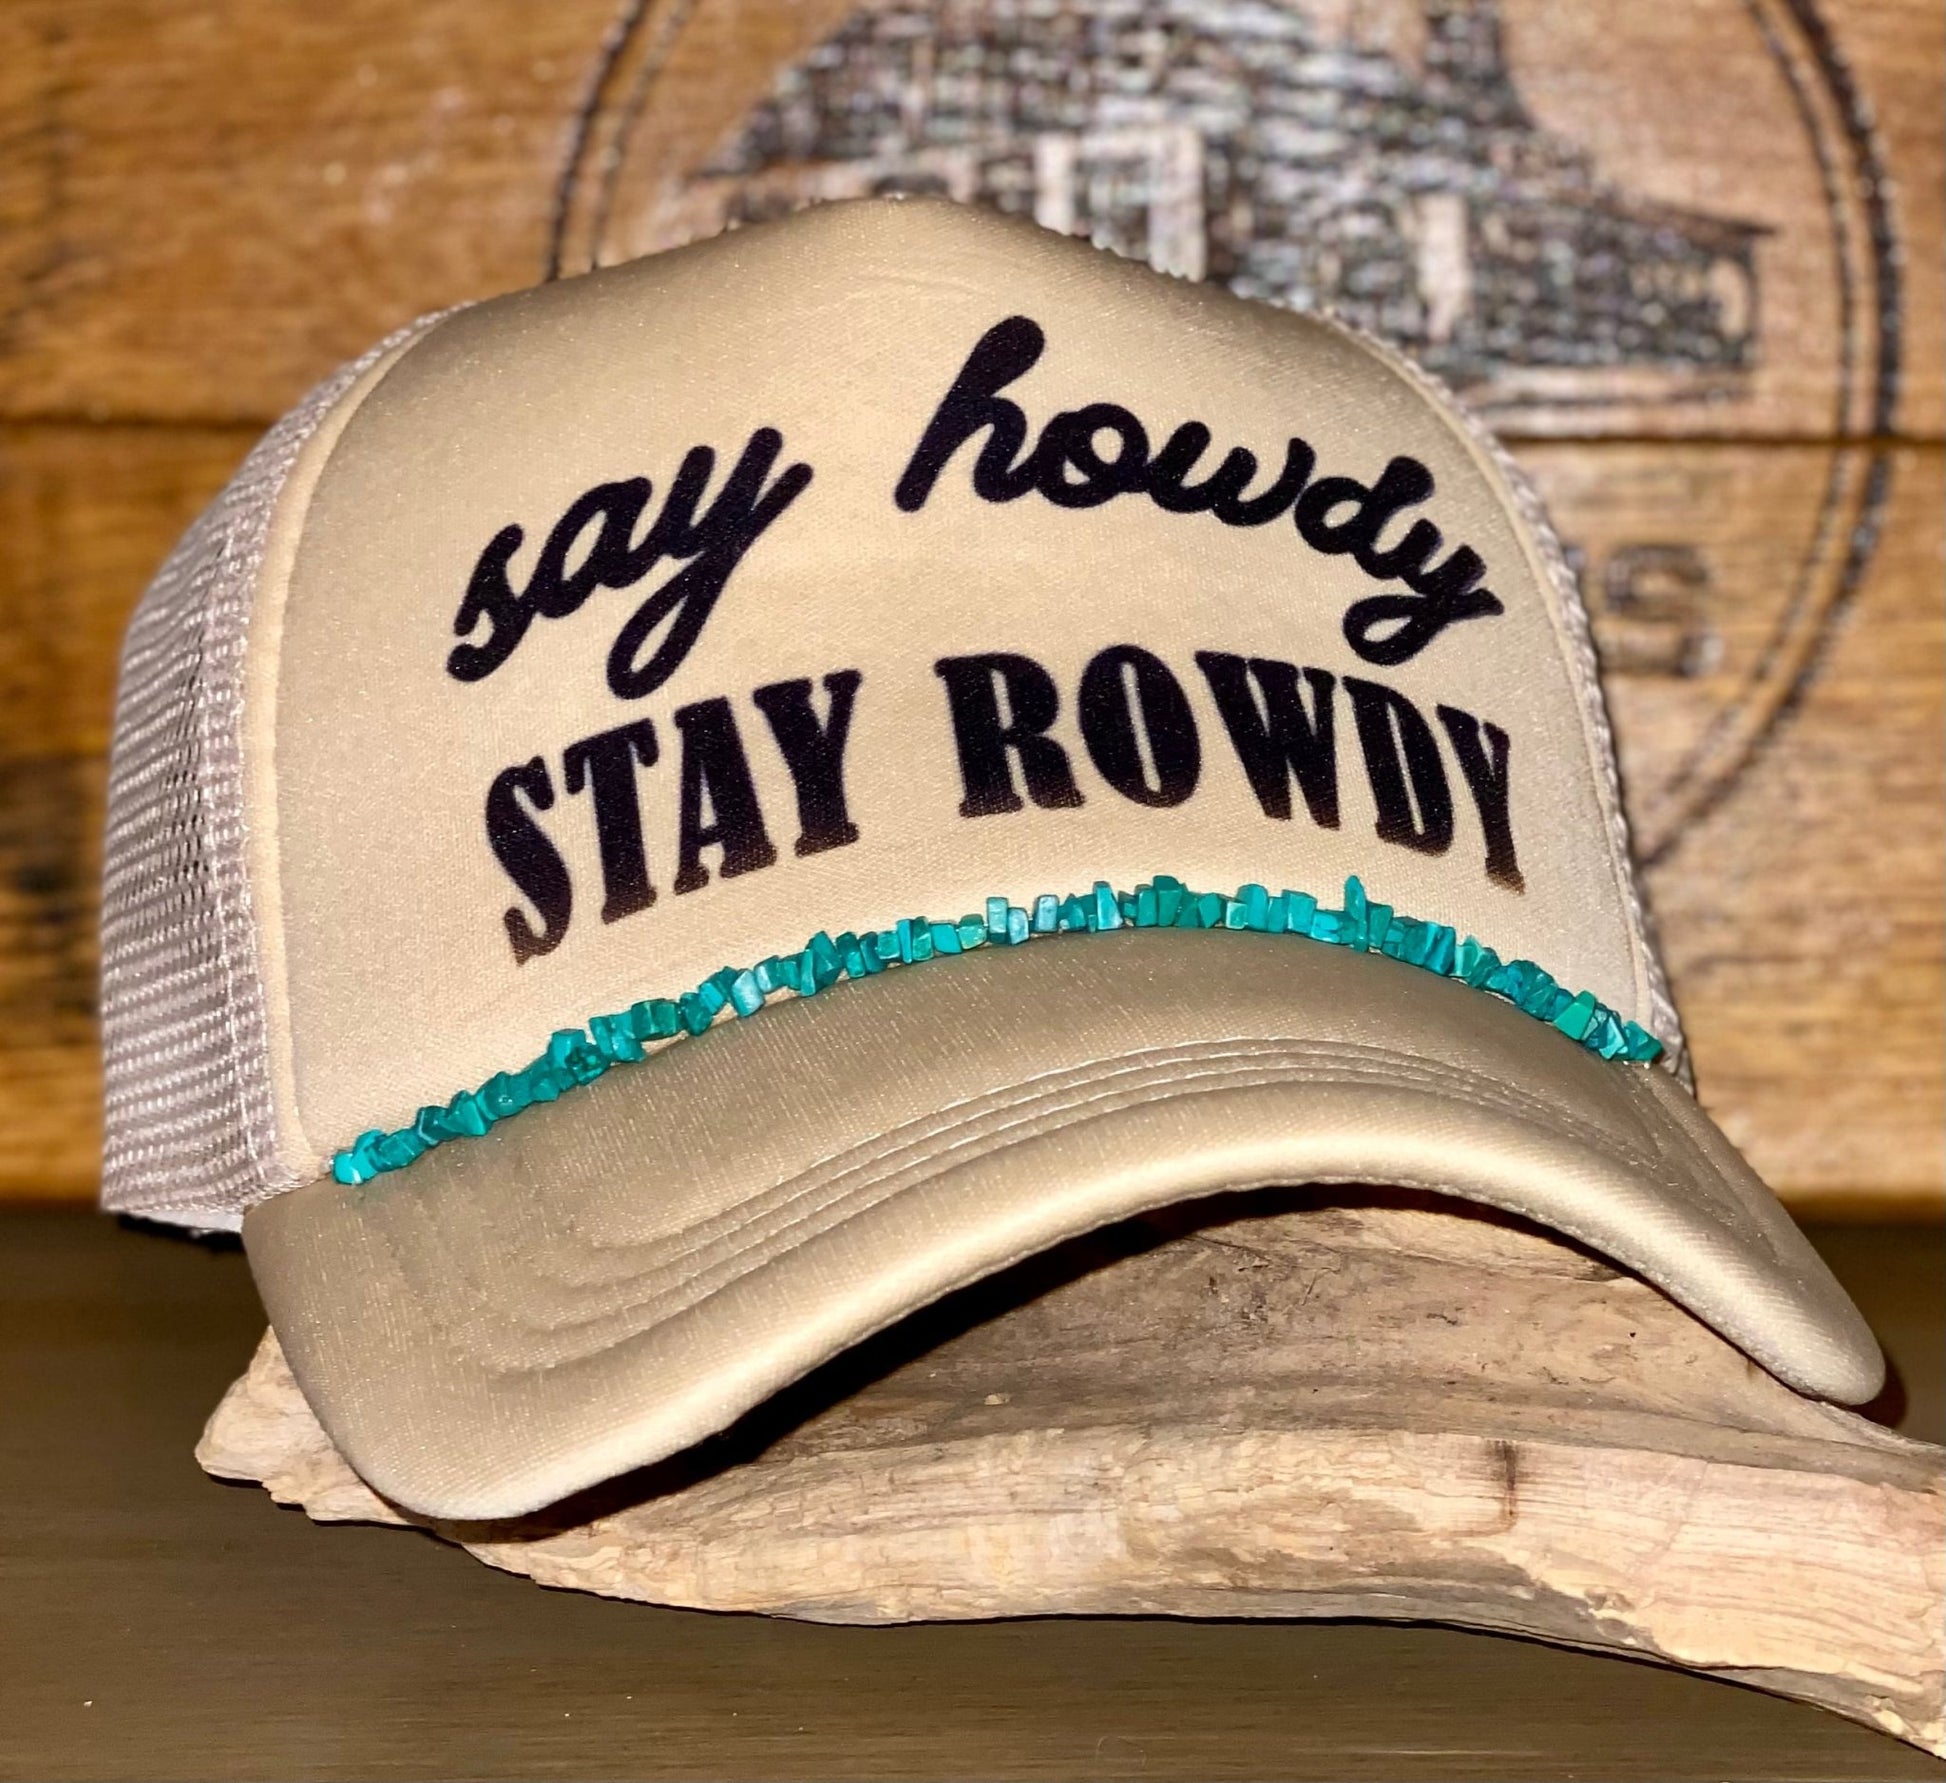 SAY HOWDY STAY ROWDY - CountryFide Custom Accessories and Outdoors